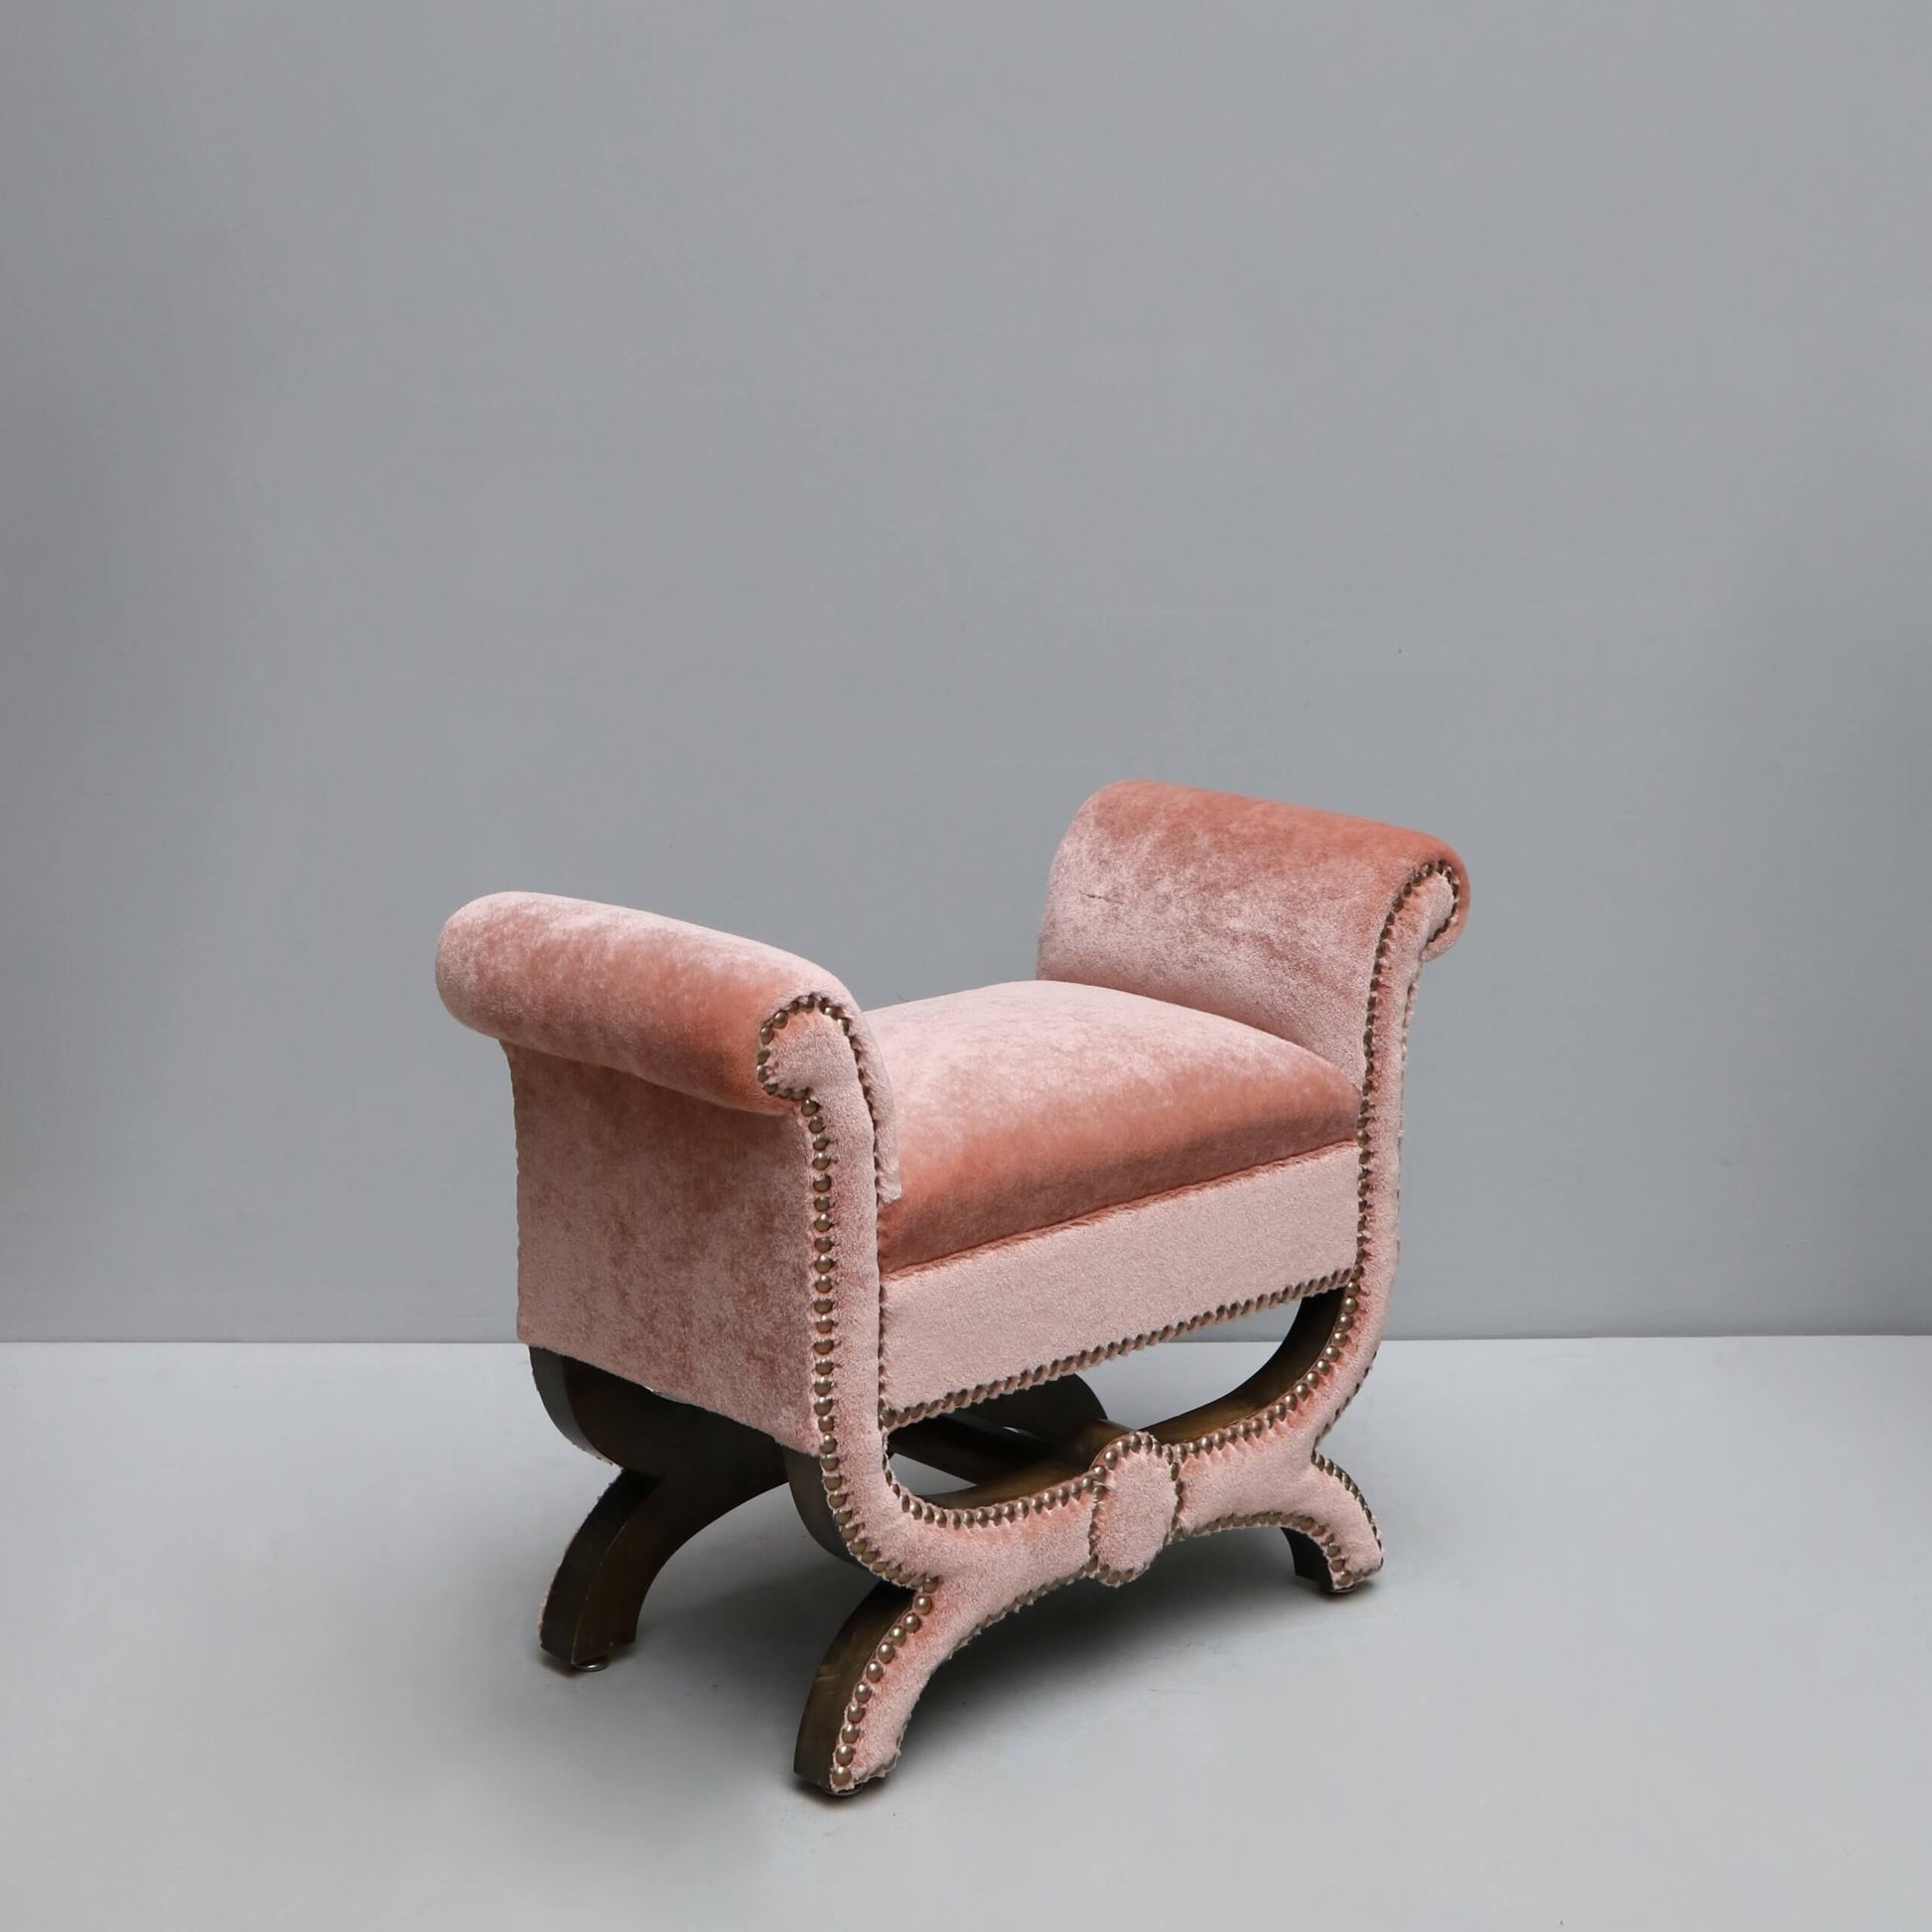 Stool by Otto Schultz in art deco style with upholstery in pink mohair velvet